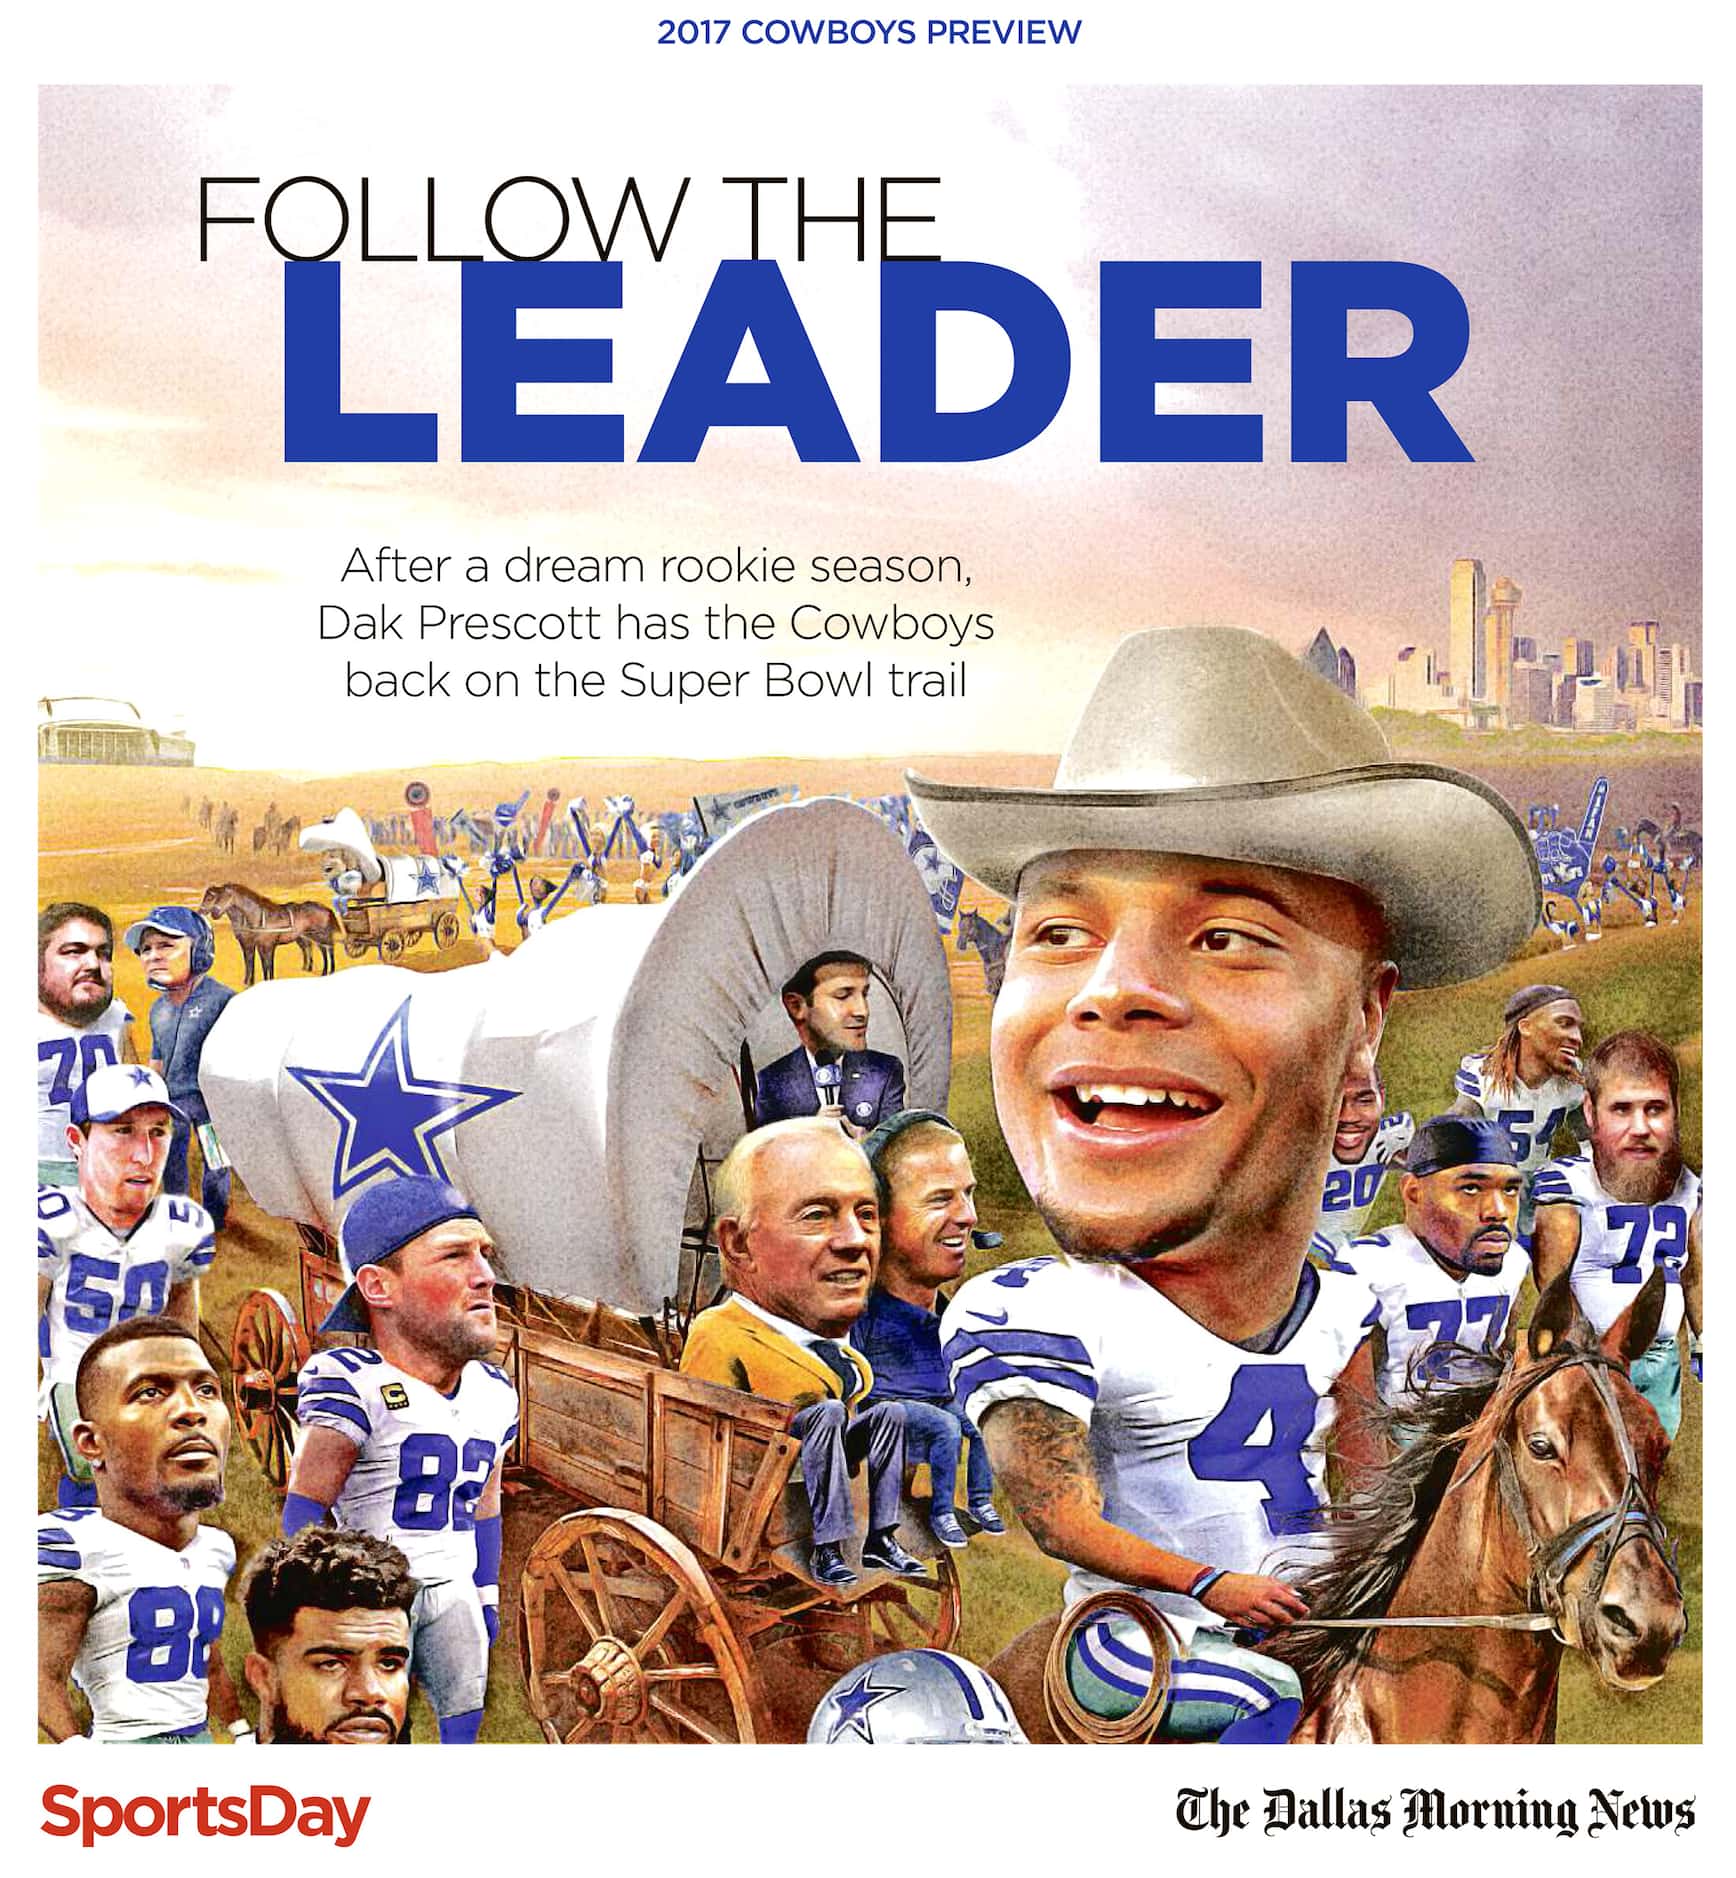 The cover of The Dallas Morning News' Cowboys preview section in 2017.